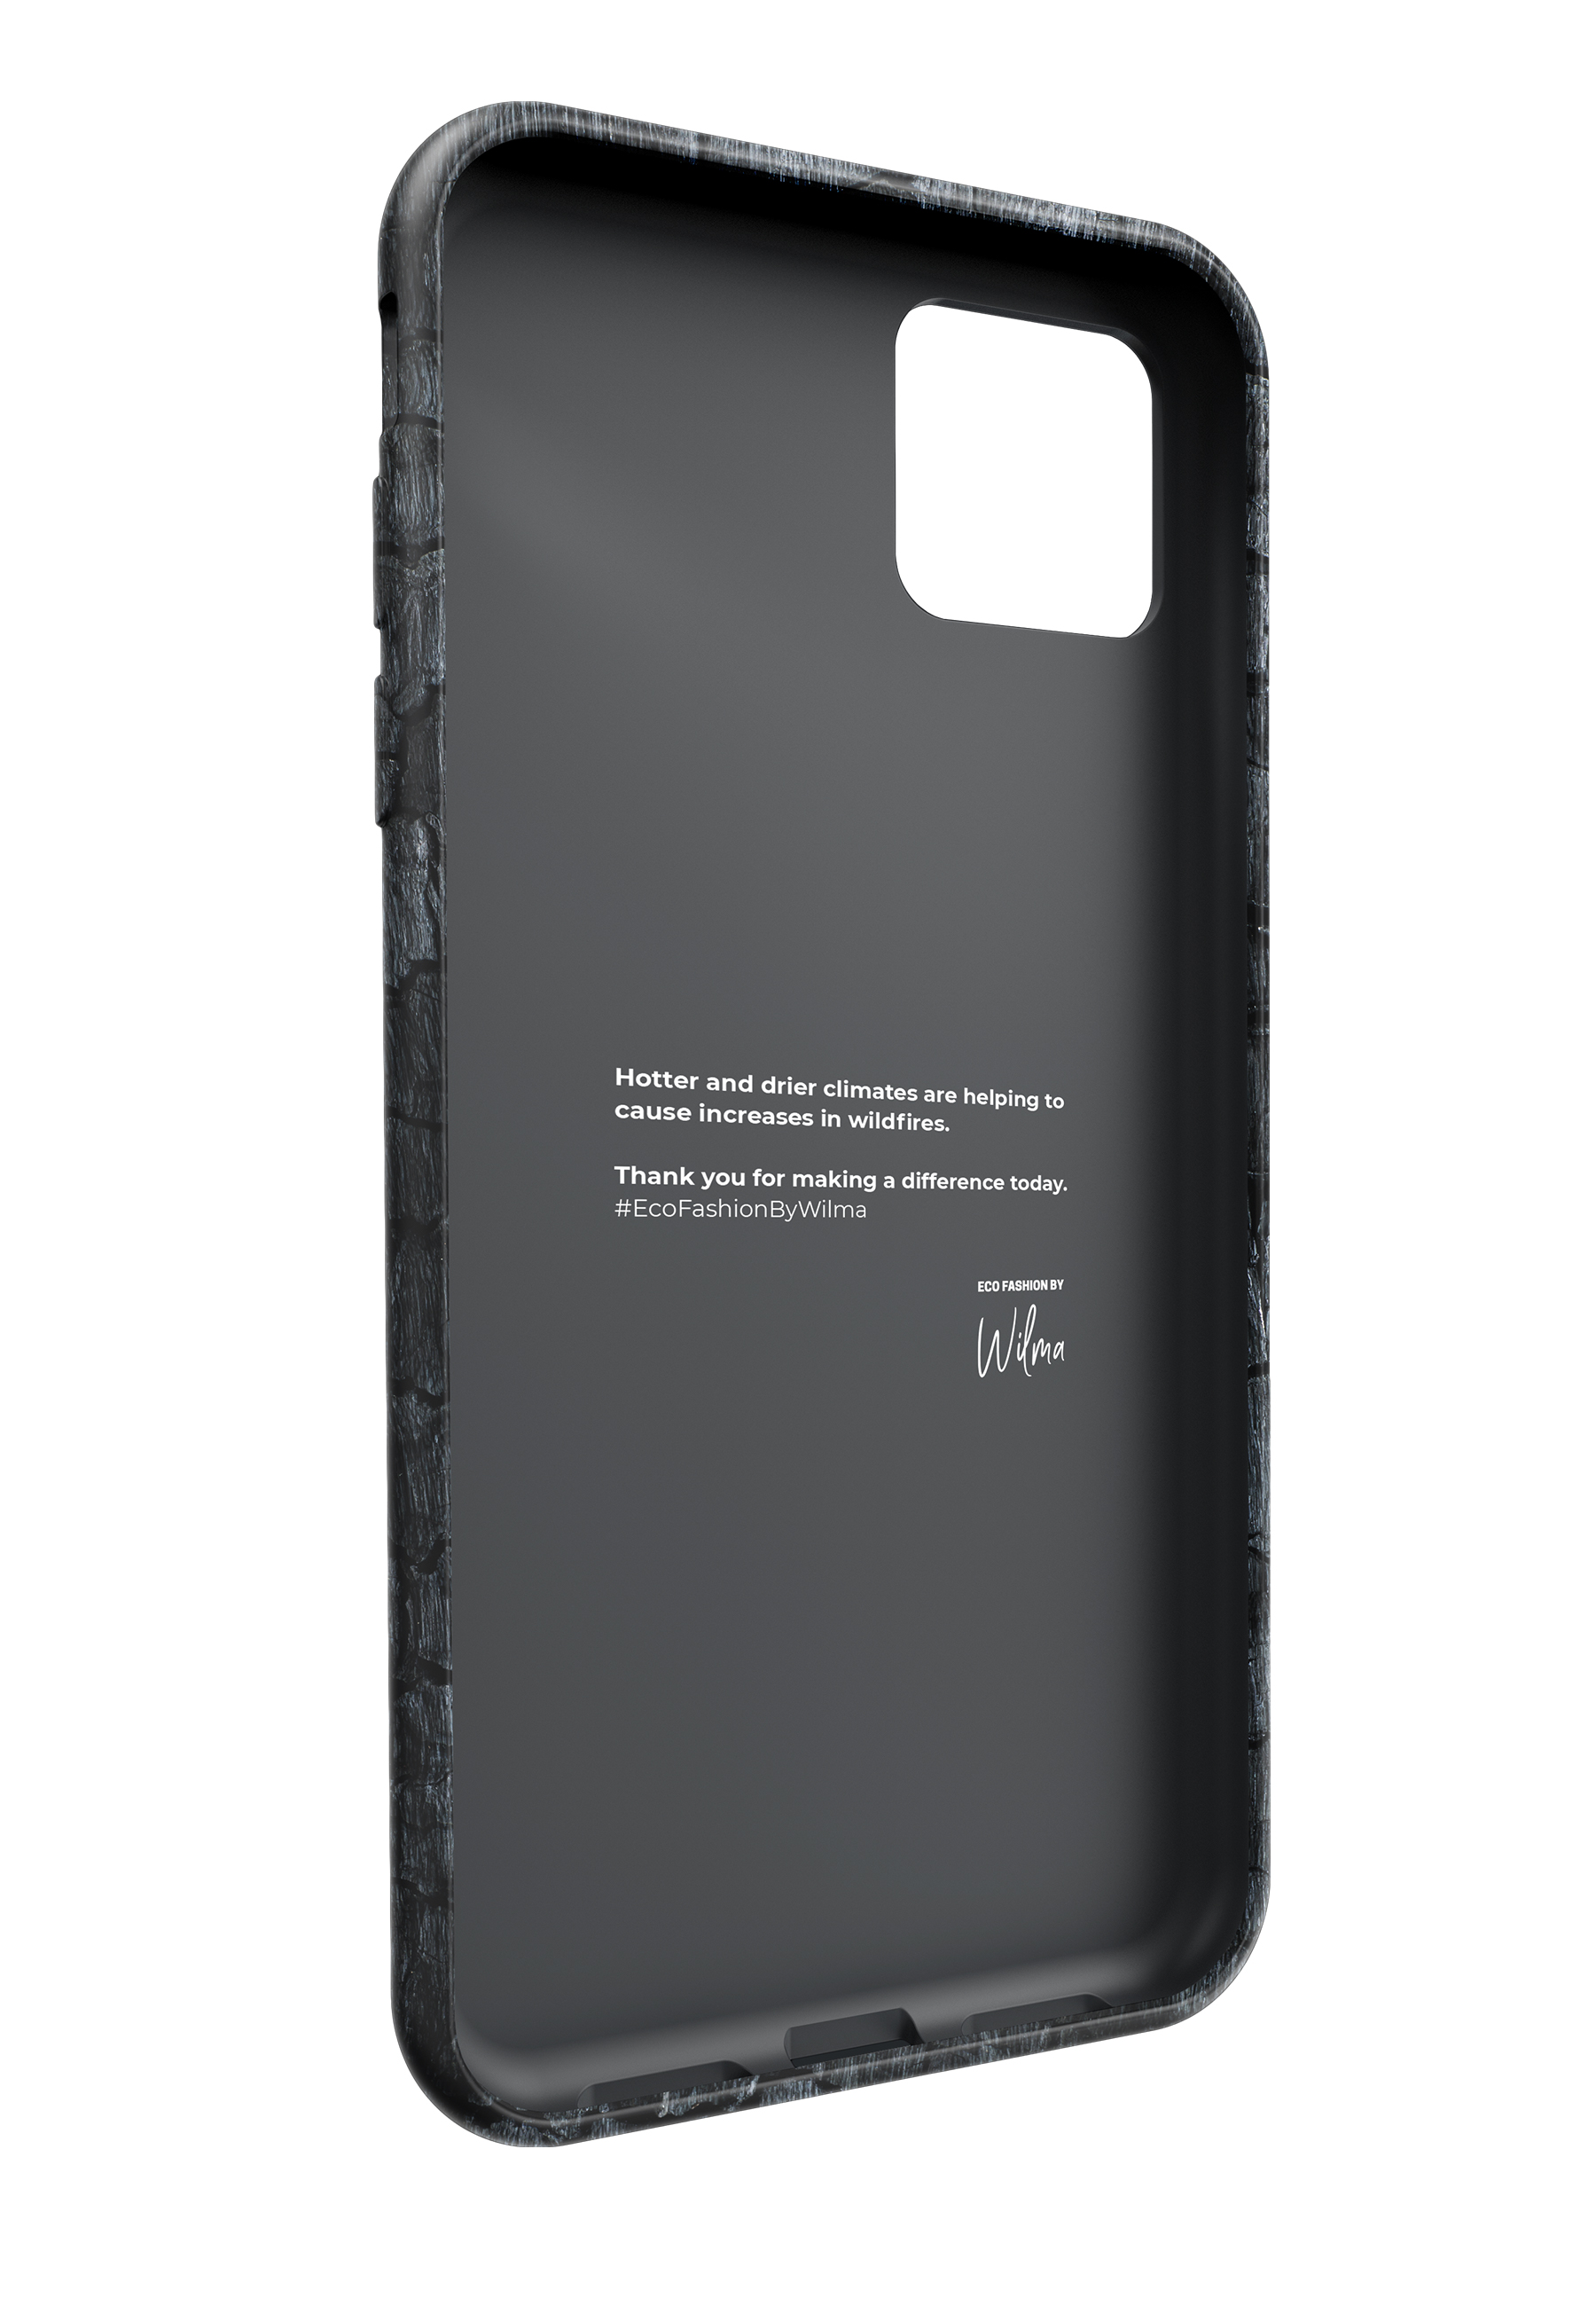 black iPhone BY Backcover, ECO Apple, Pro Max, P11PM, FASHION WILMA 11